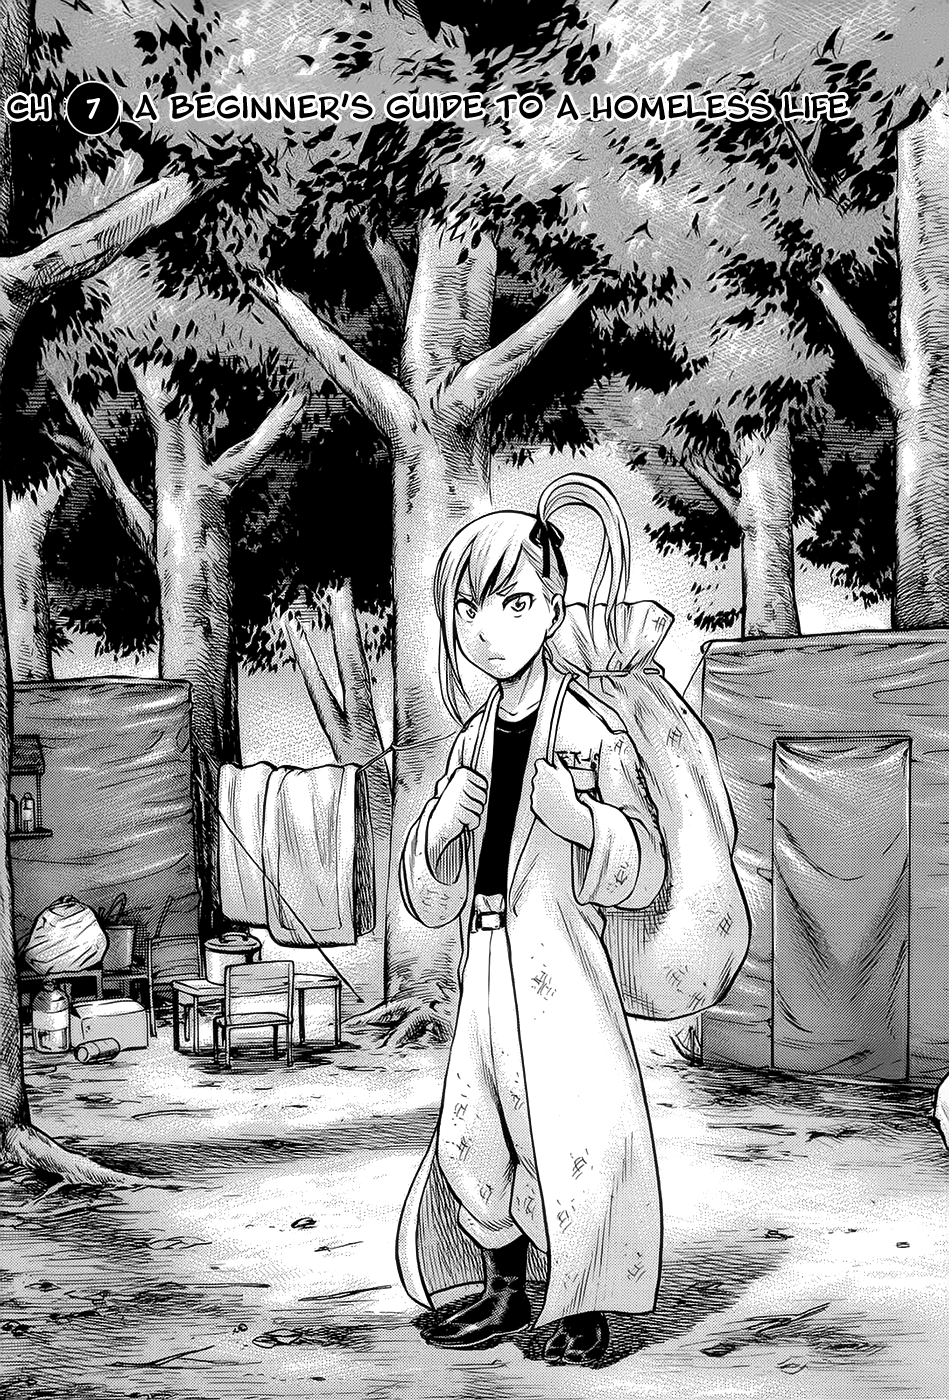 Hinamatsuri Vol.2-Chapter.7-A-Beginner's-Guide-To-A-Homeless-Life Image